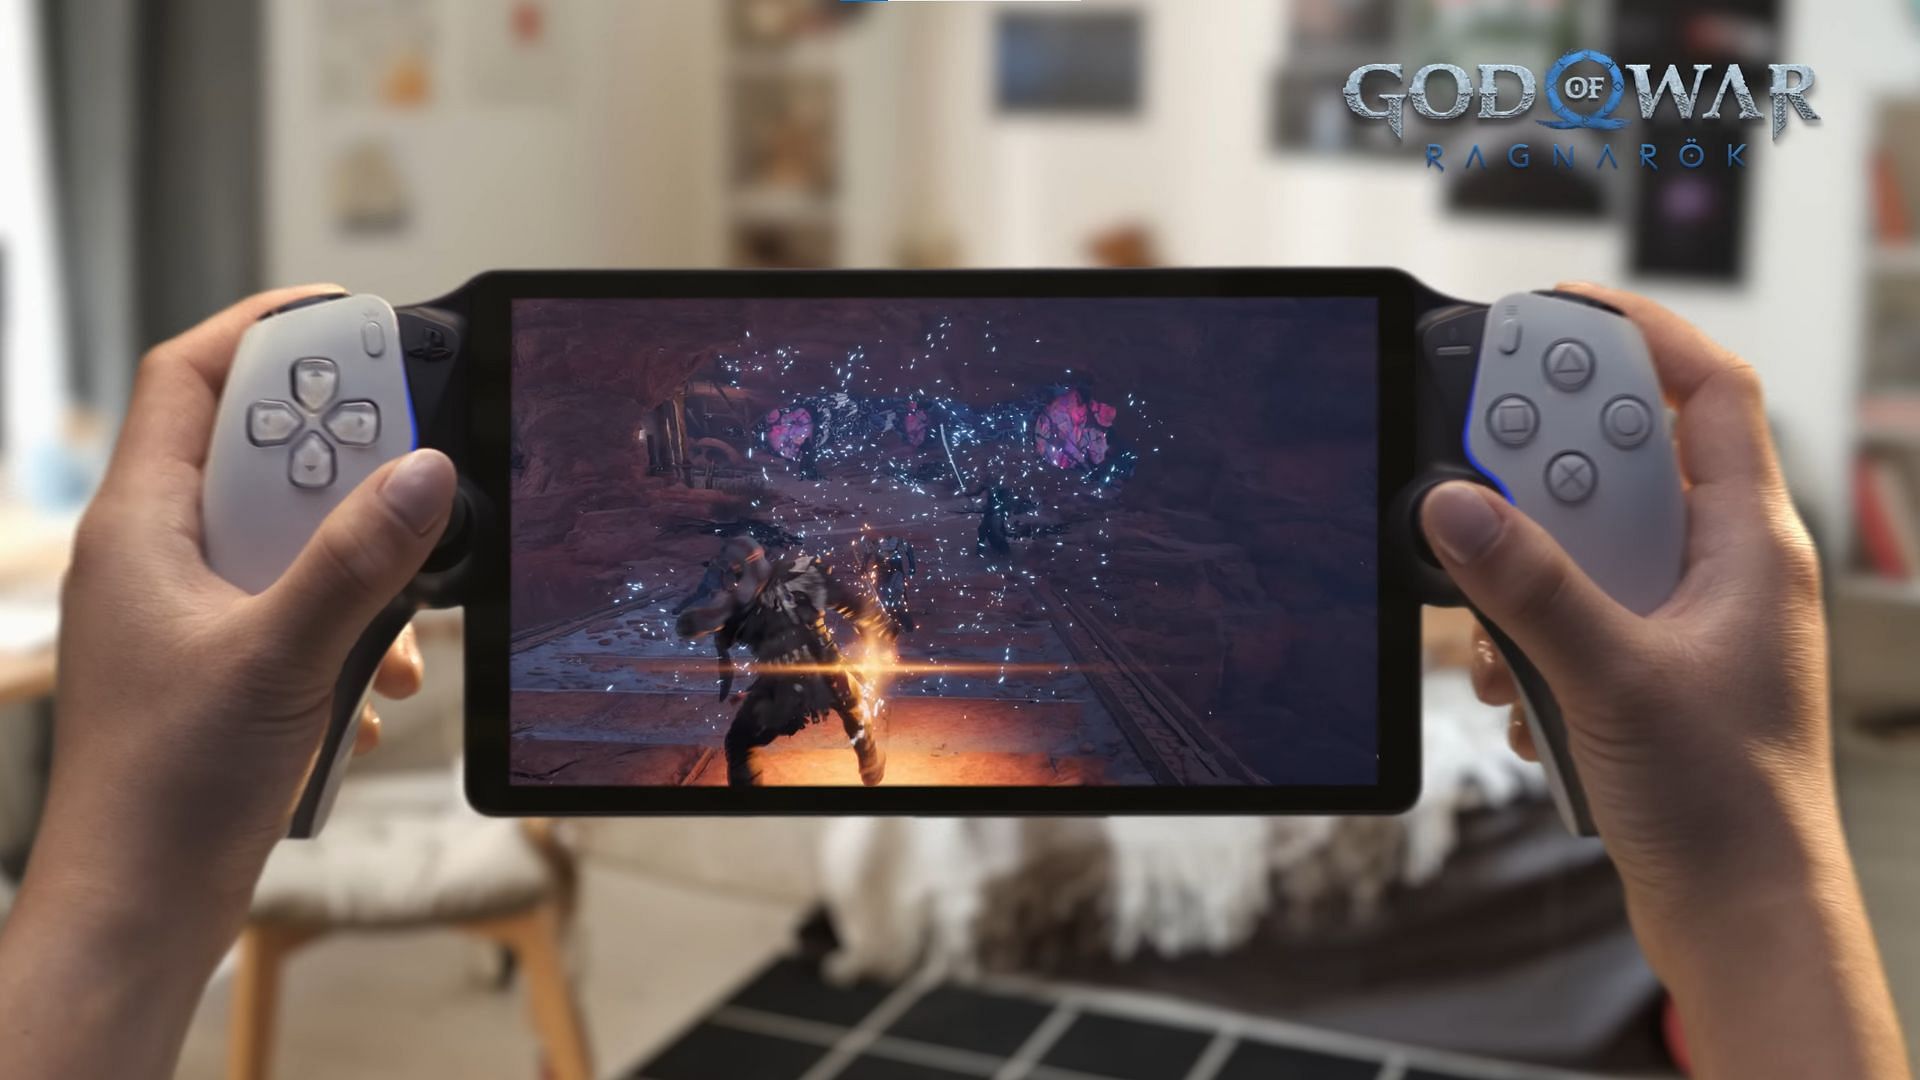 The GOW Ragnarok is running on the PlayStation Portal (Image via Sony)